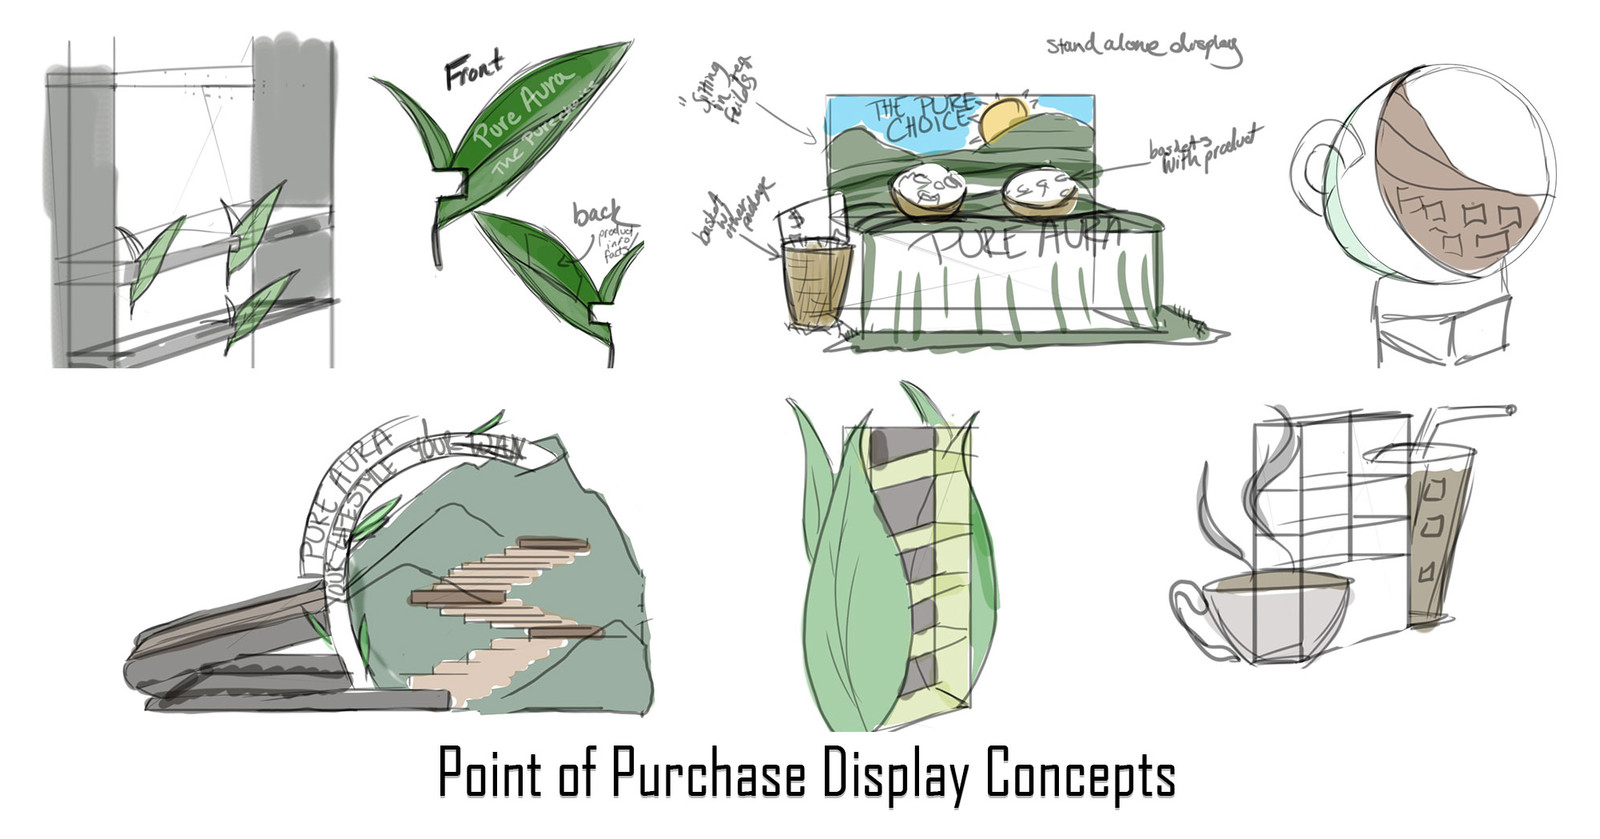 Pure Aura Point of Purchase Concepts
Initial concept designs for an in store displays. 